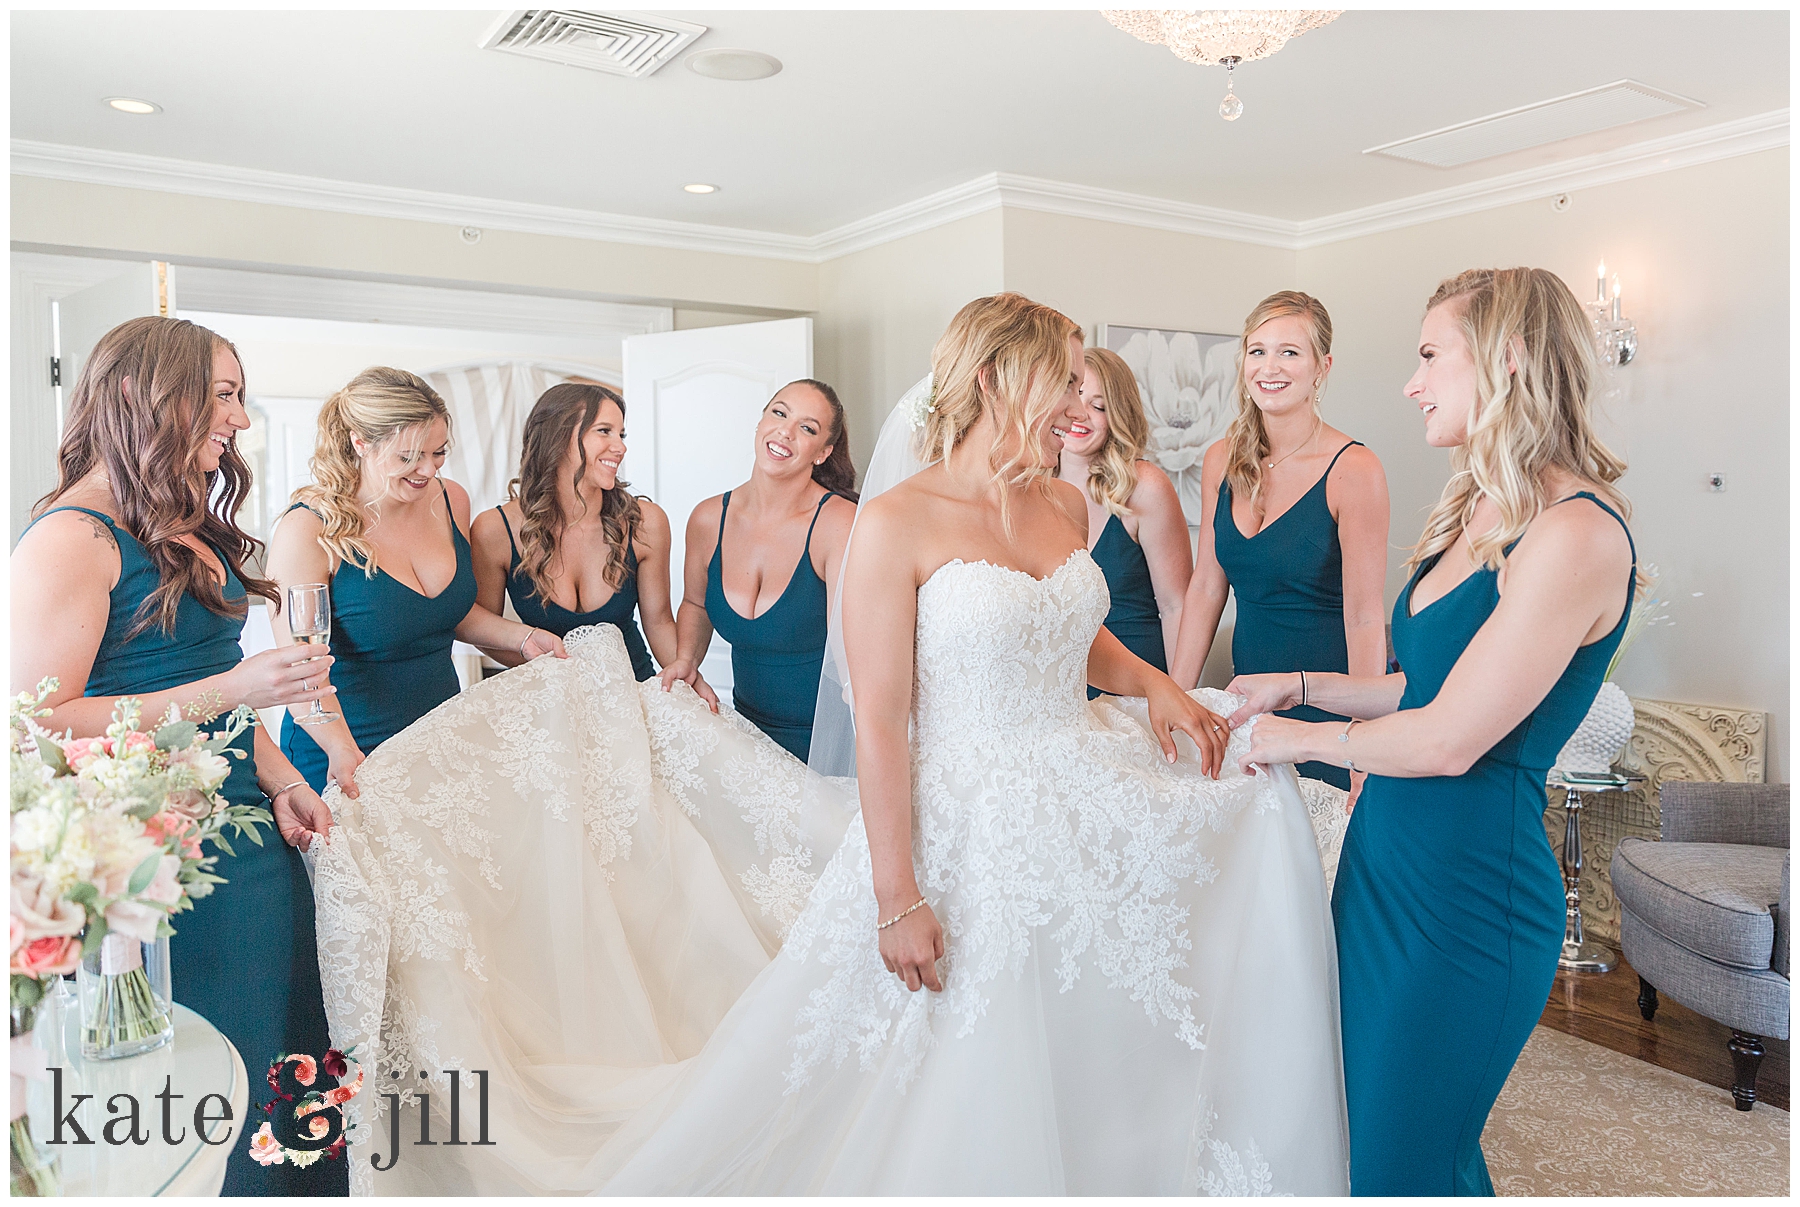 Bride with bridesmaids holding dress